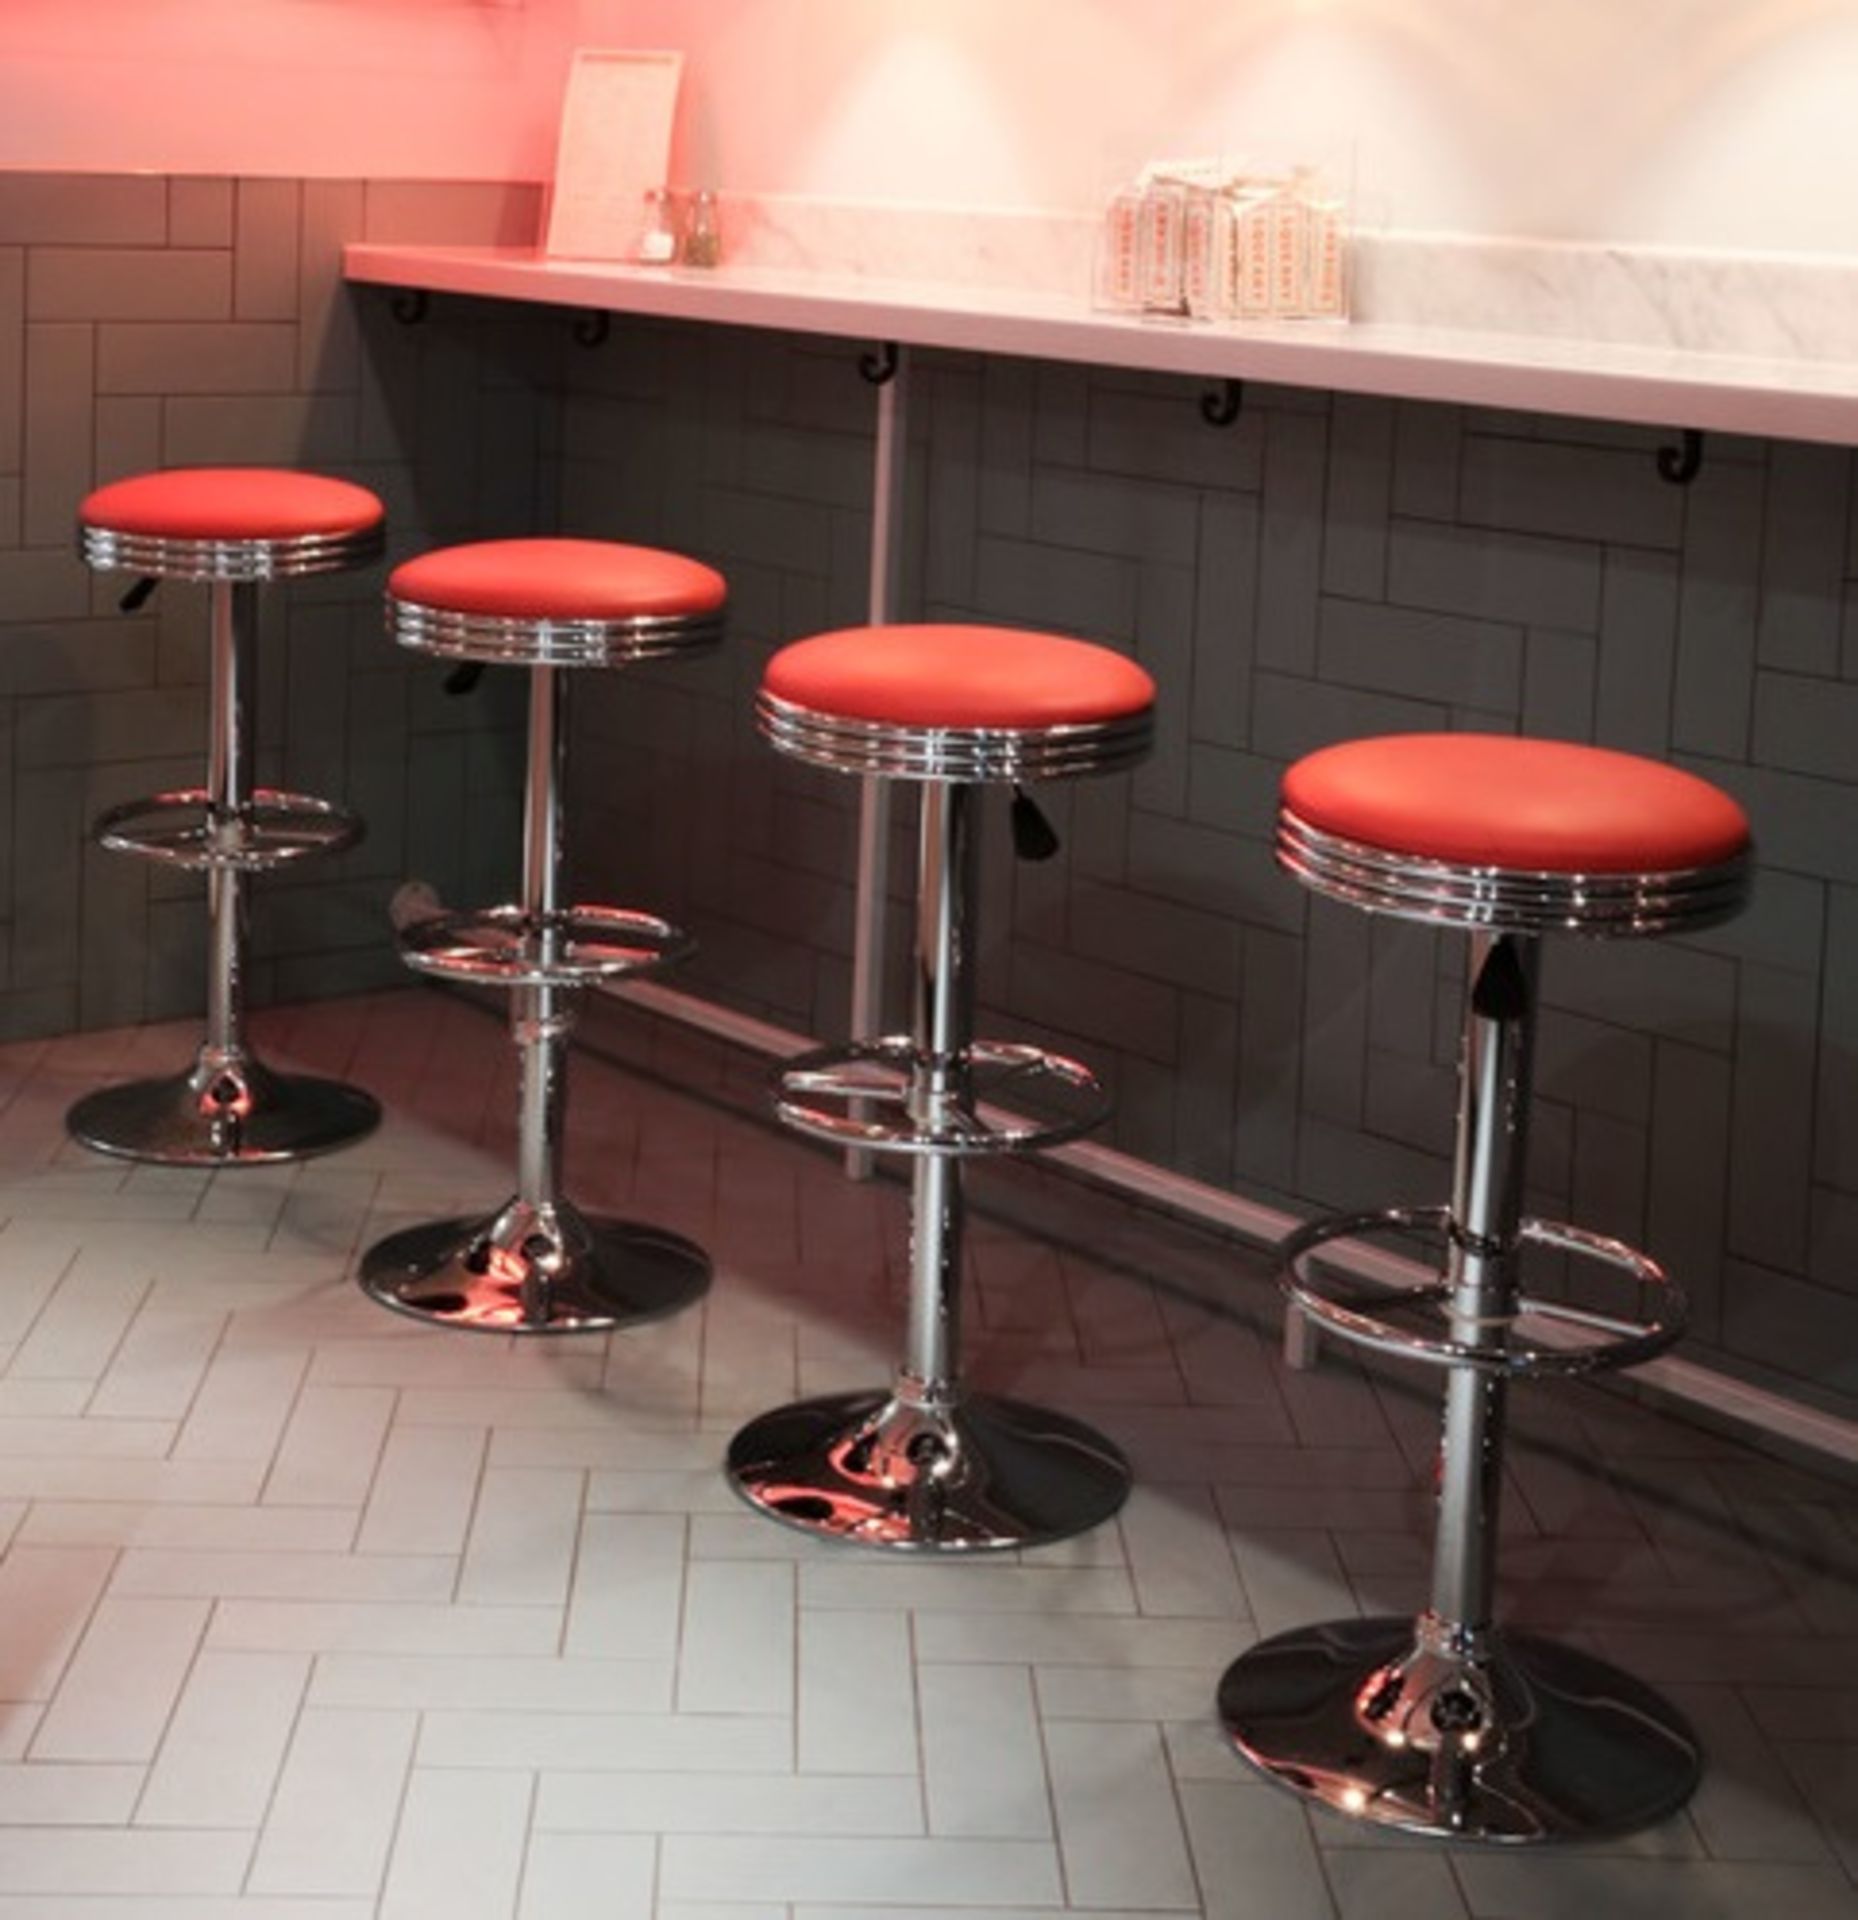 4 x Retro American Roadside Diner Themed Gas Lift Bar Stools - CL164 - Fantastic Stools With Full